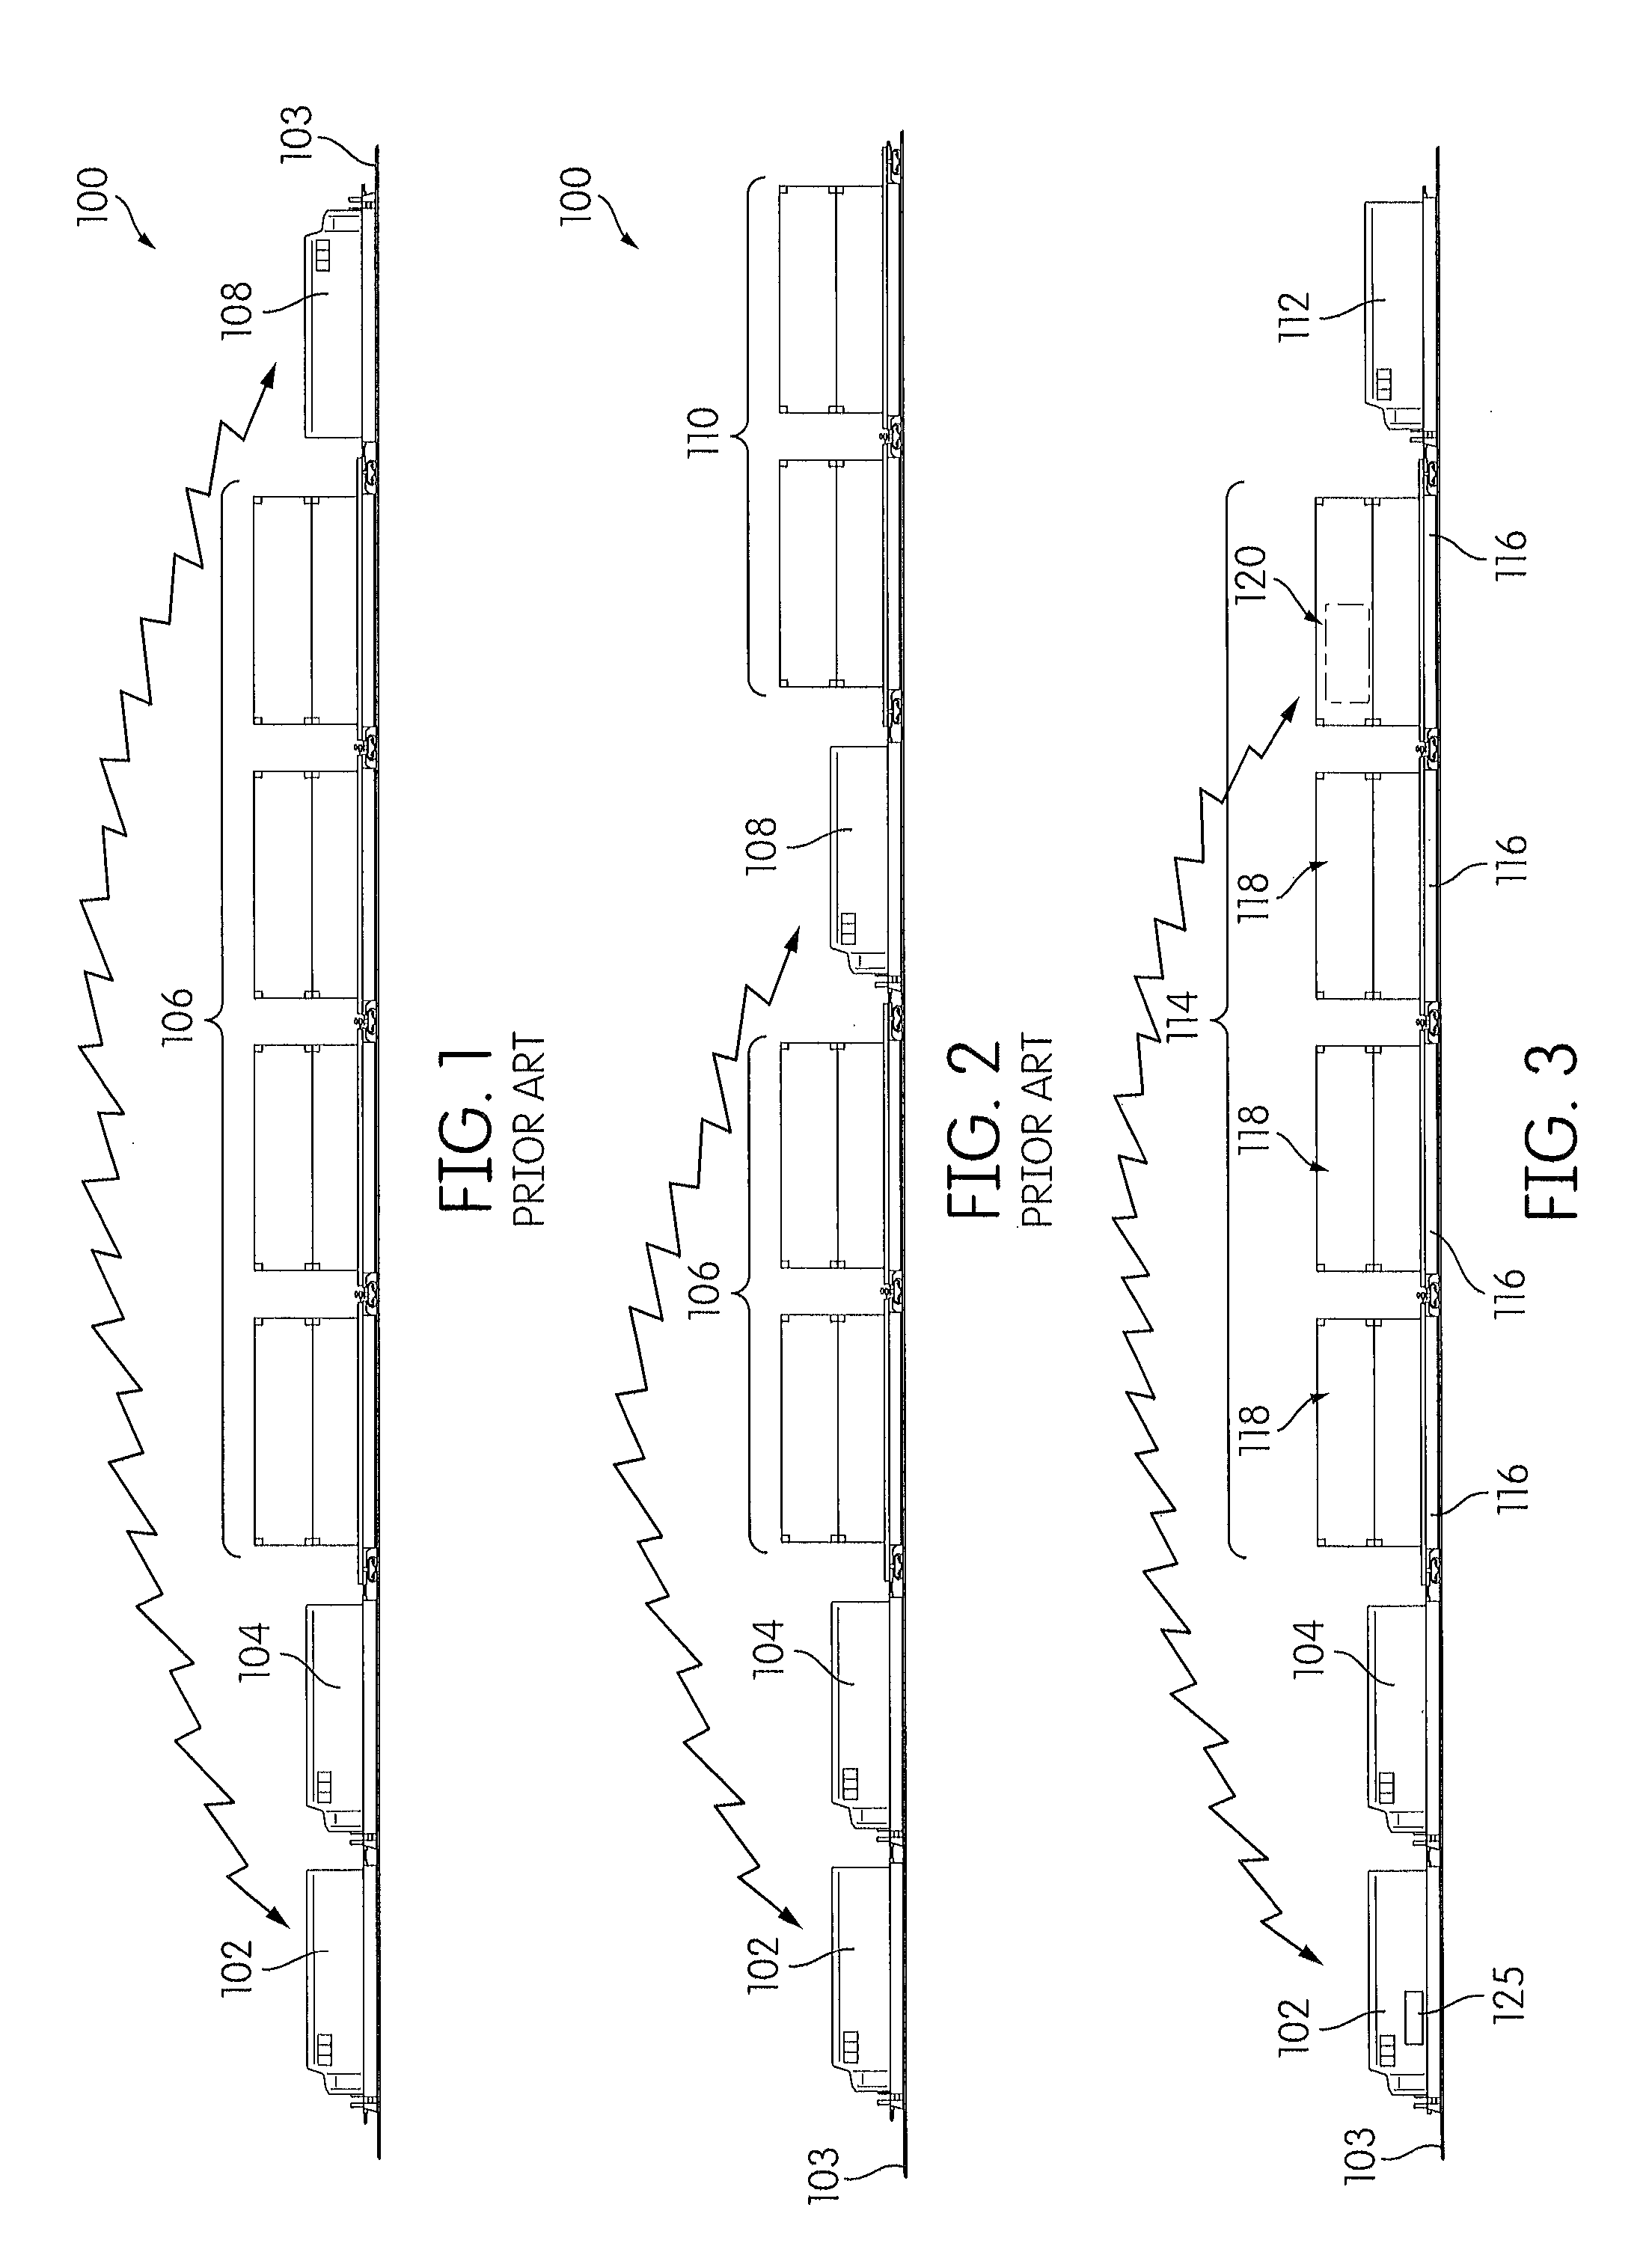 Containerized locomotive distributed power control